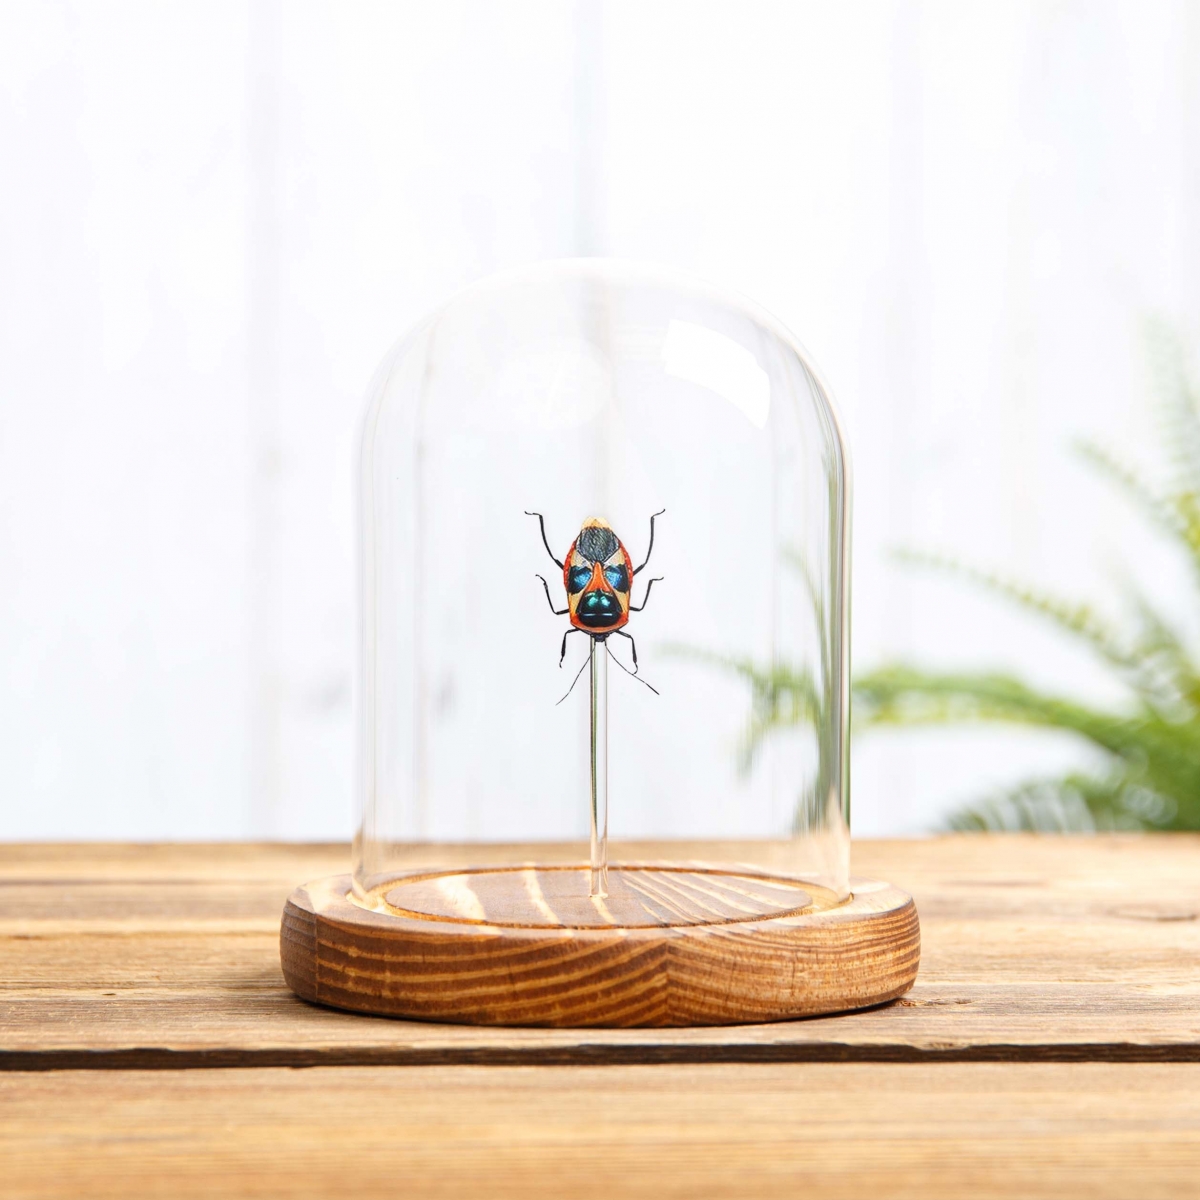 Colourful Man-faced Bug in Glass Dome with Wooden Base (Catacanthus nigripes)